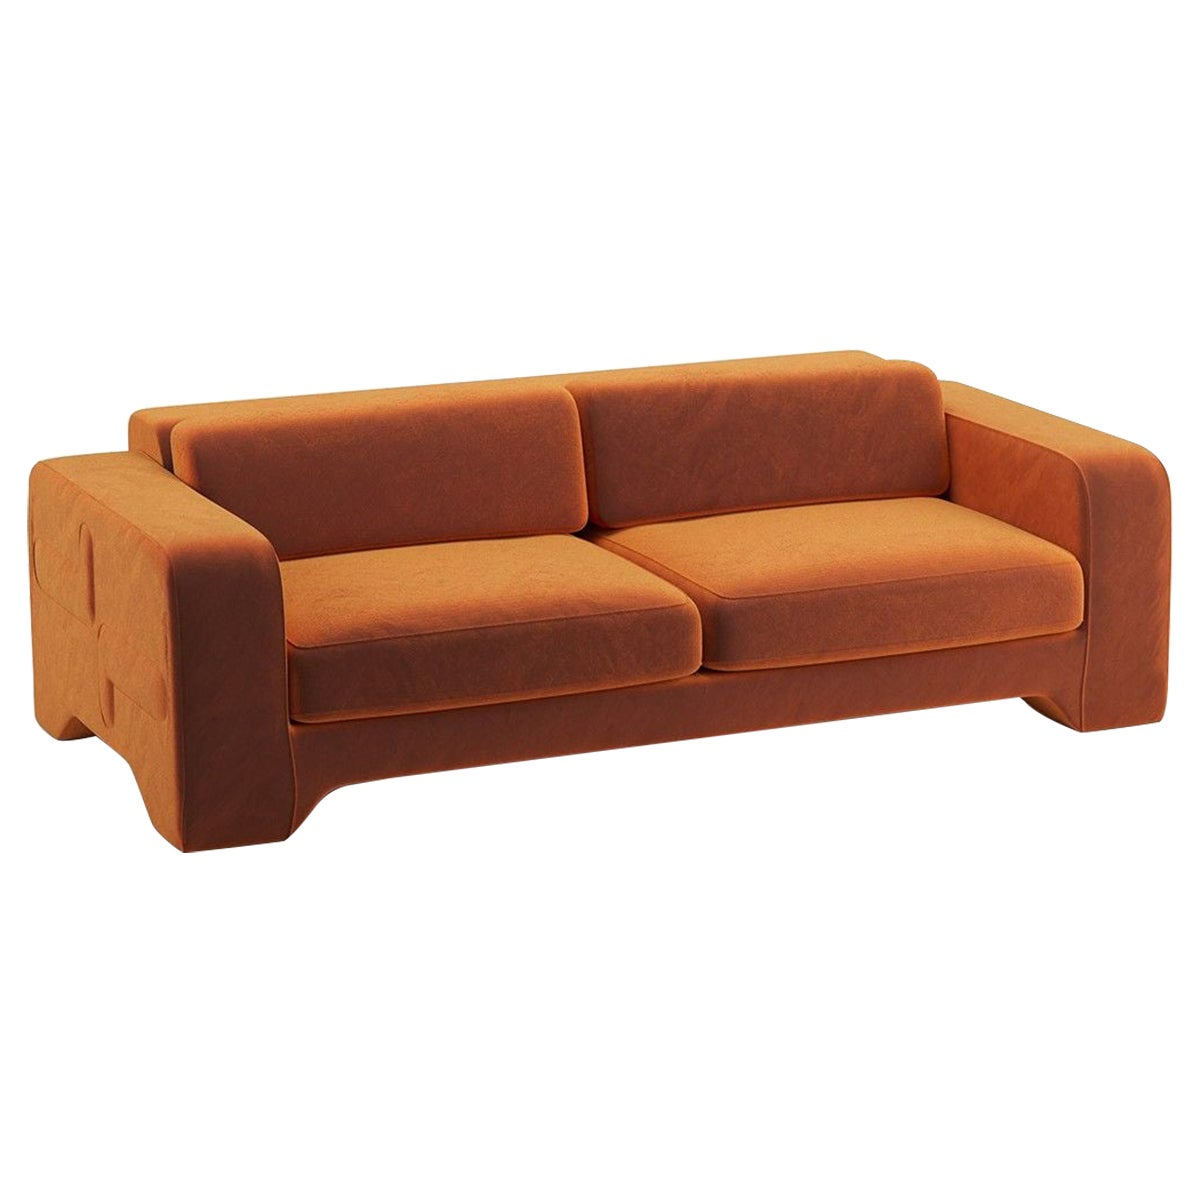 Popus Editions Giovanna 3 Seater Sofa in Amber Como Velvet Upholstery For Sale